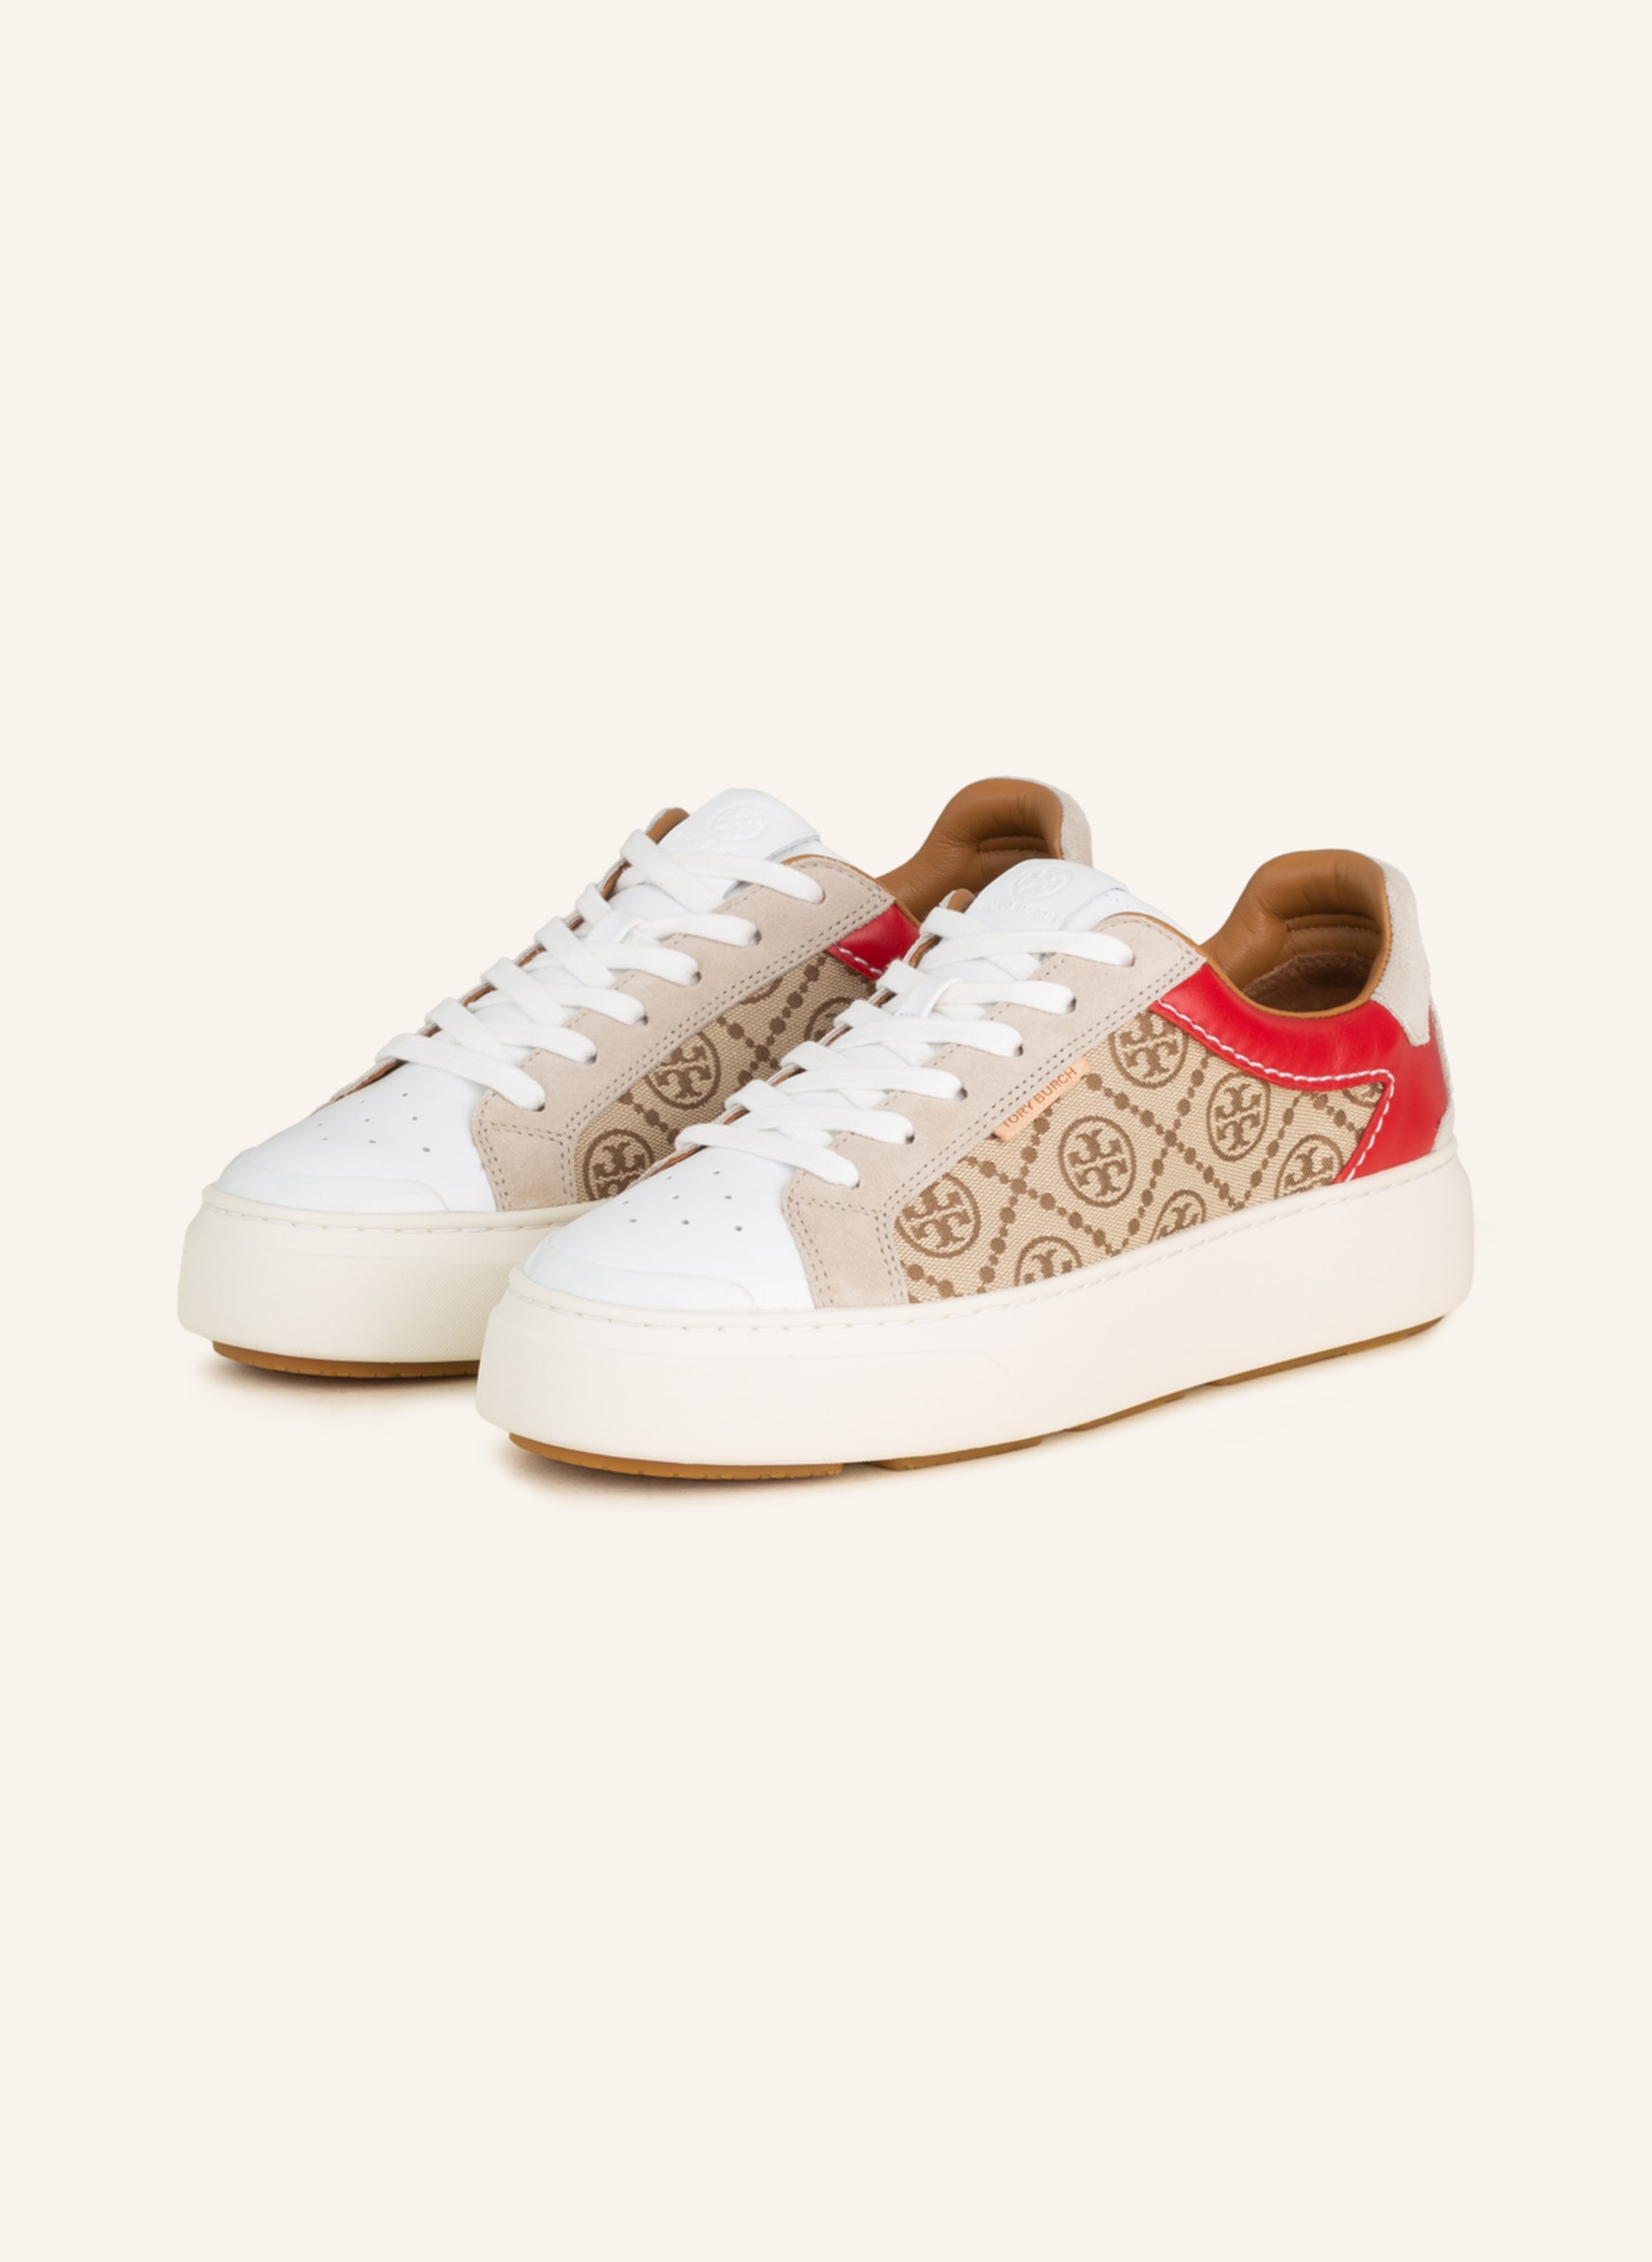 TORY BURCH Sneakers in beige/ red/ white | Breuninger